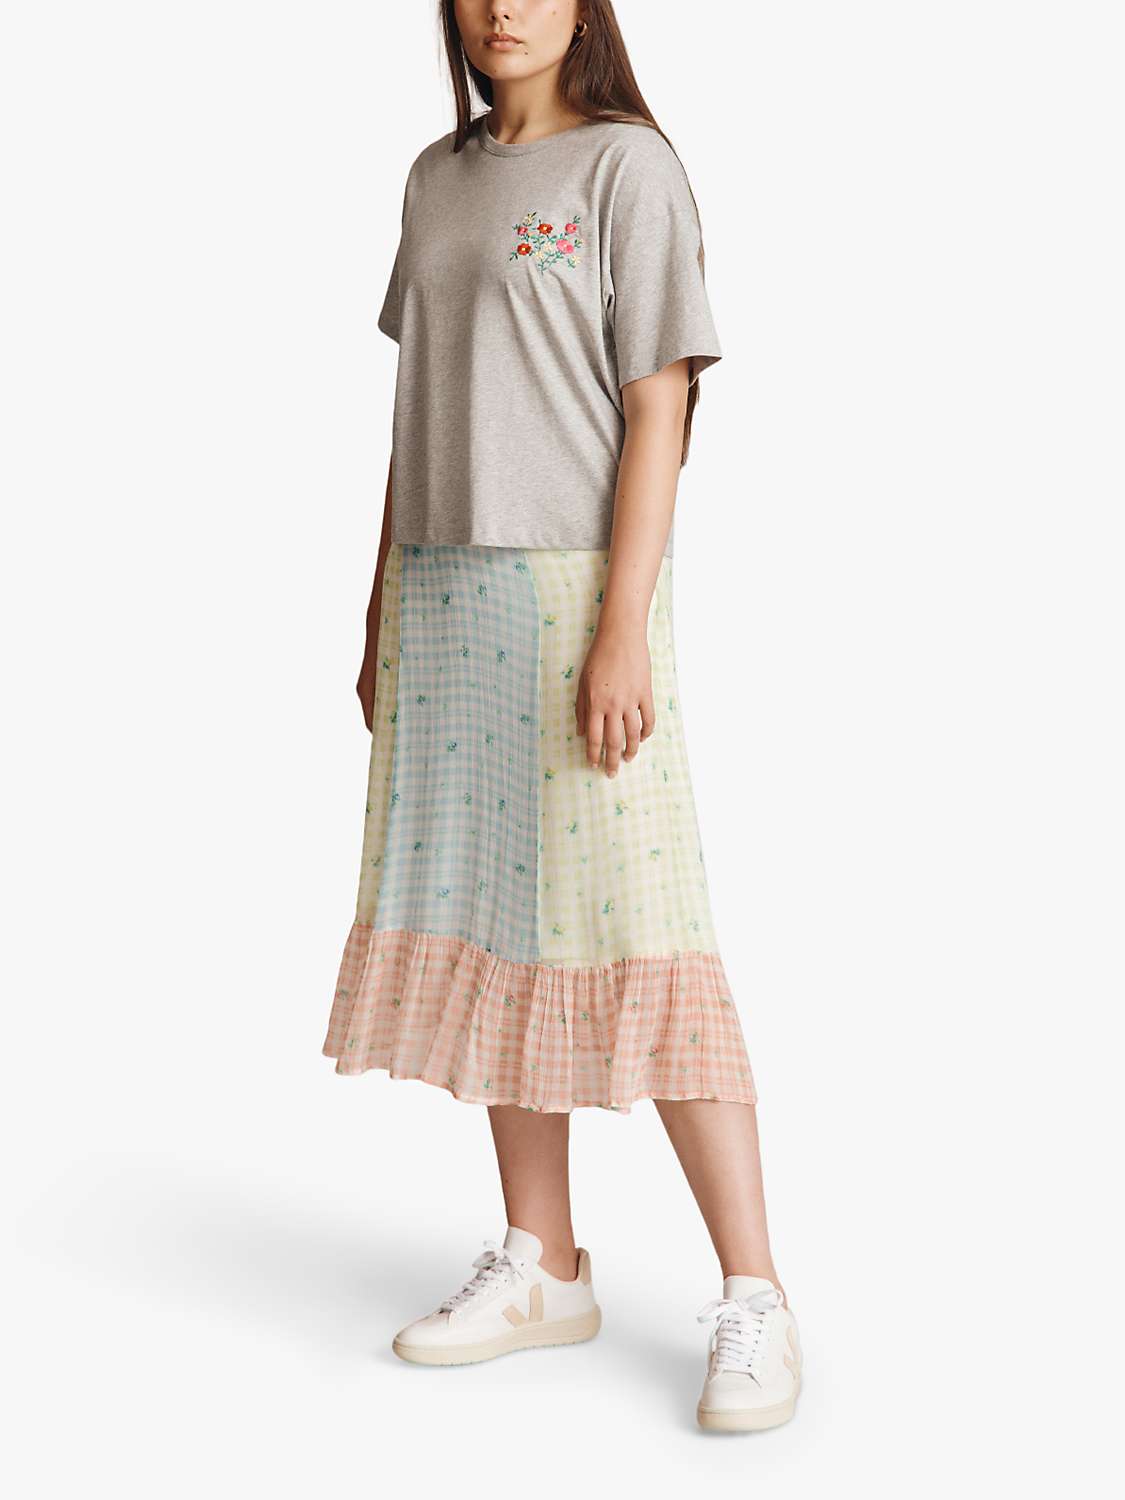 Buy Ghost Mia Embroidered T-Shirt Online at johnlewis.com